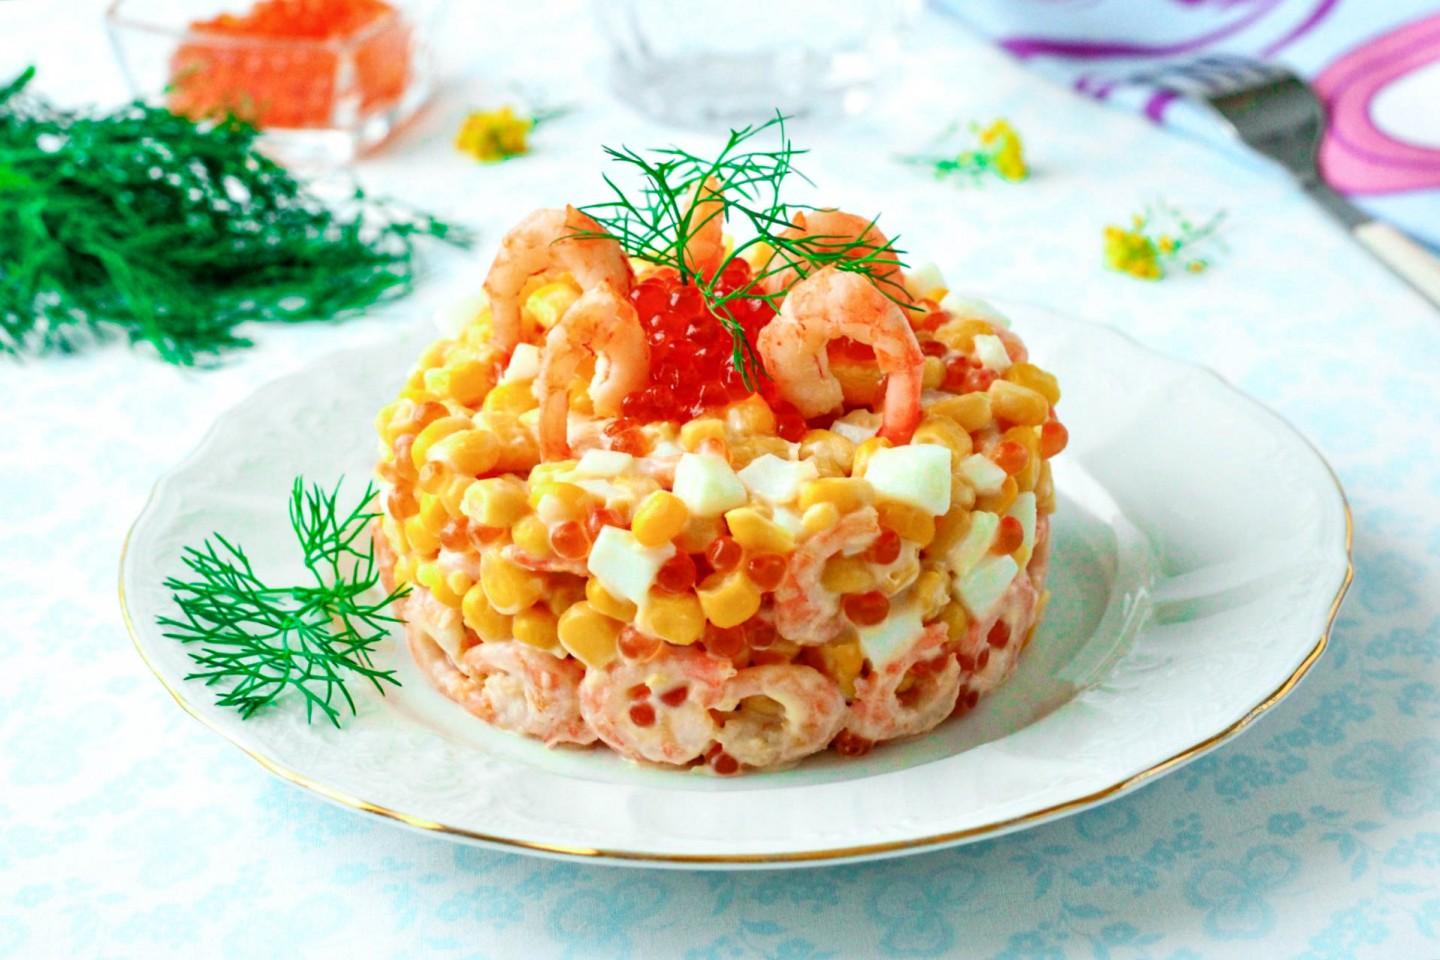 TSARSKY SALAD WITH SHRIMPS AND RED CAVIAR